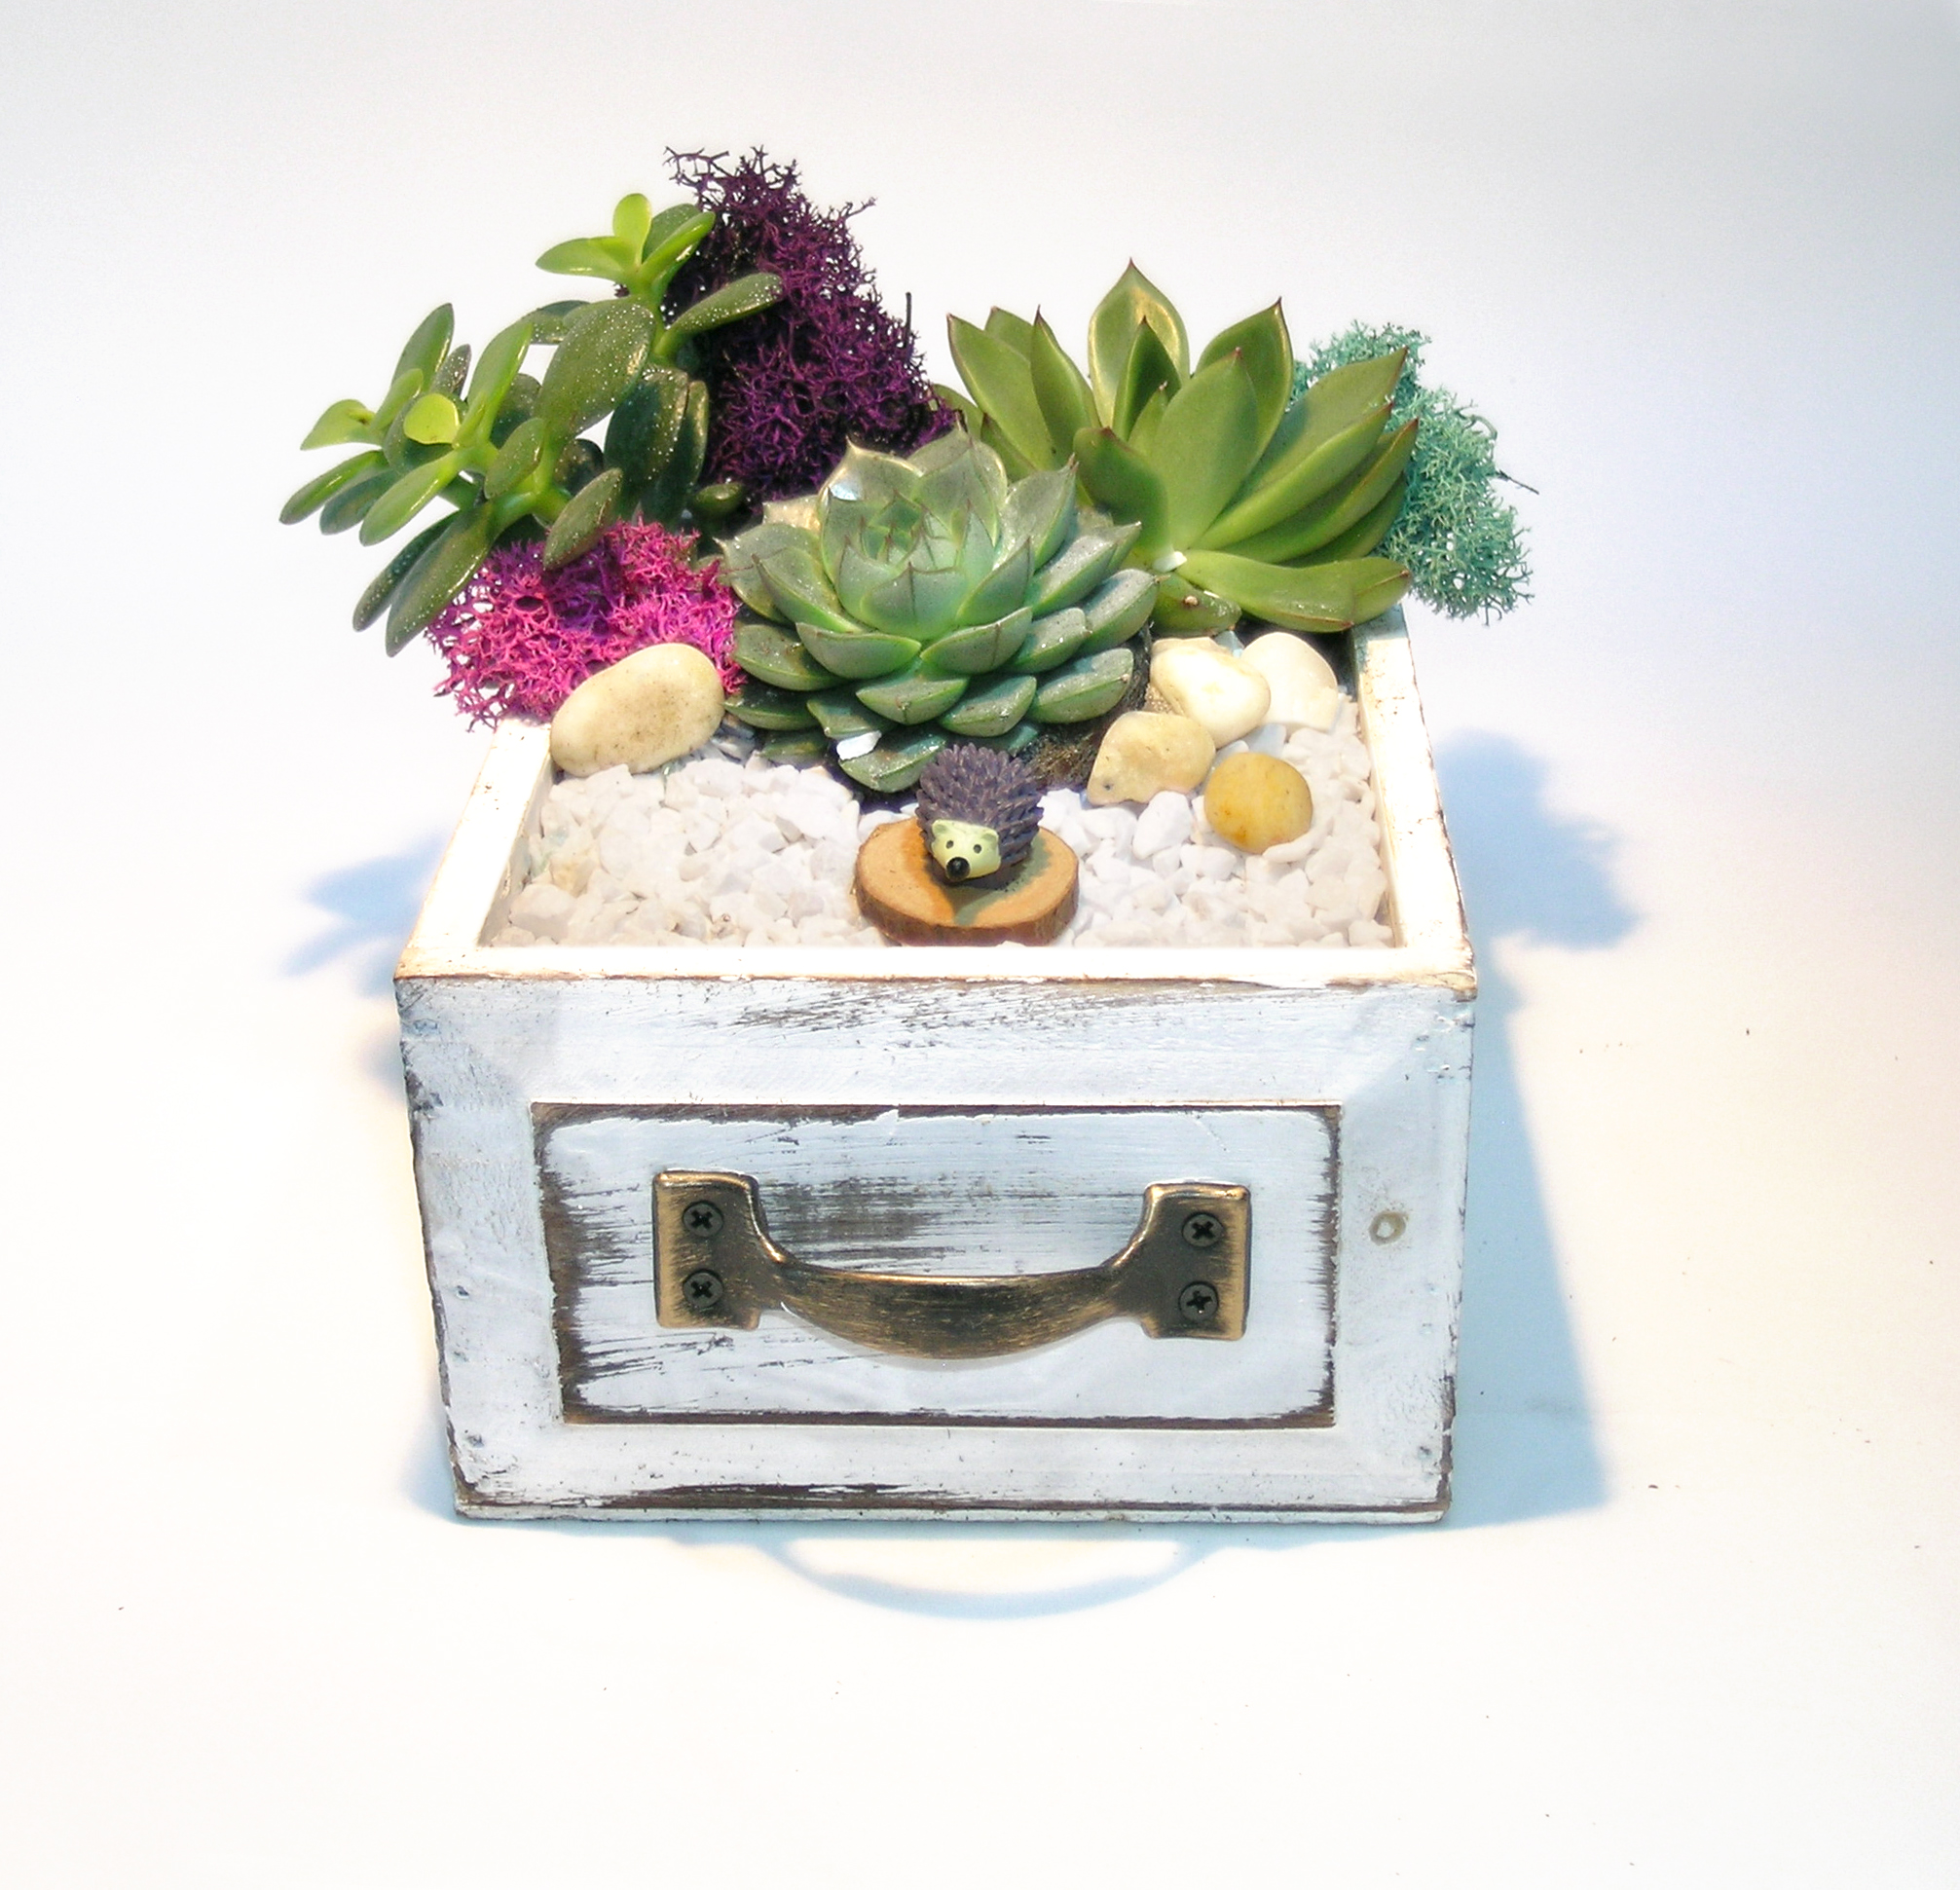 A Hedgehog Wooden Drawer plant nite project by Yaymaker